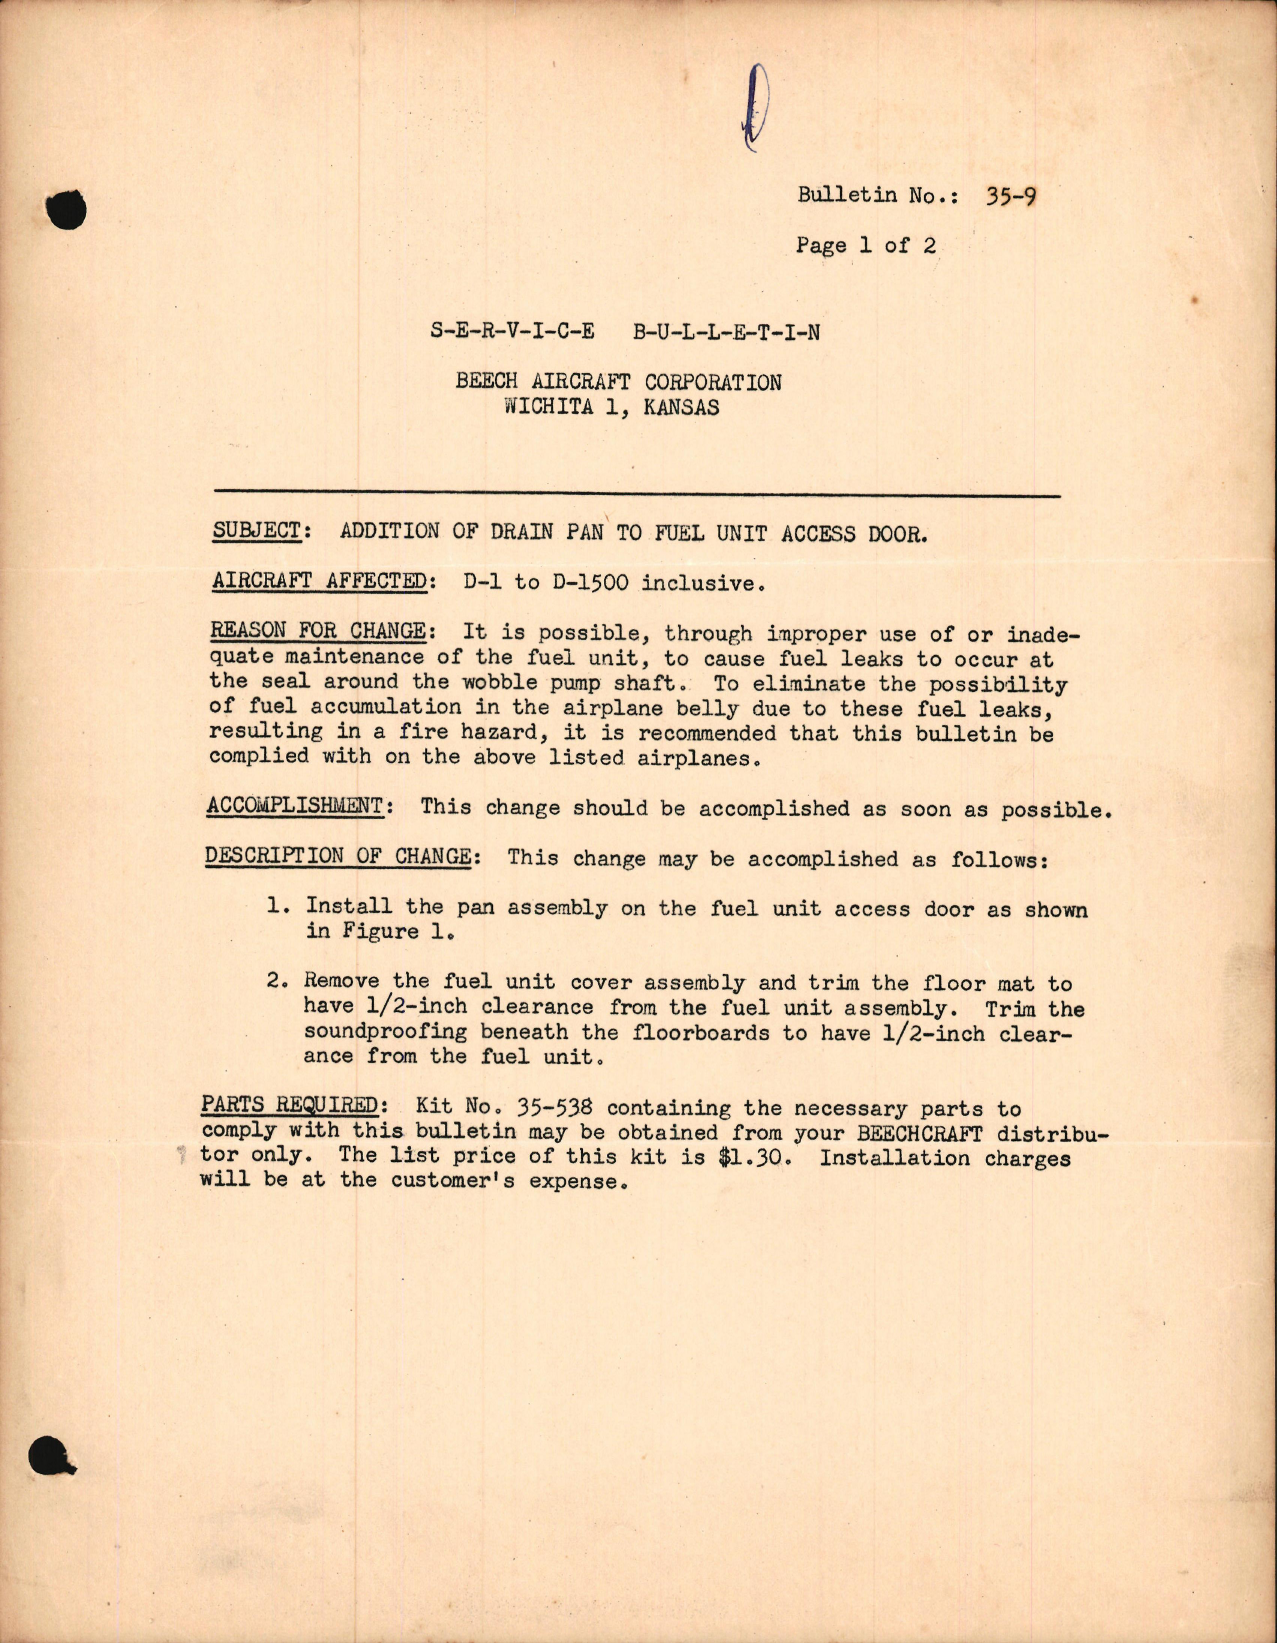 Sample page 1 from AirCorps Library document: Addition of Drain Pan to Fuel Unit Access Door